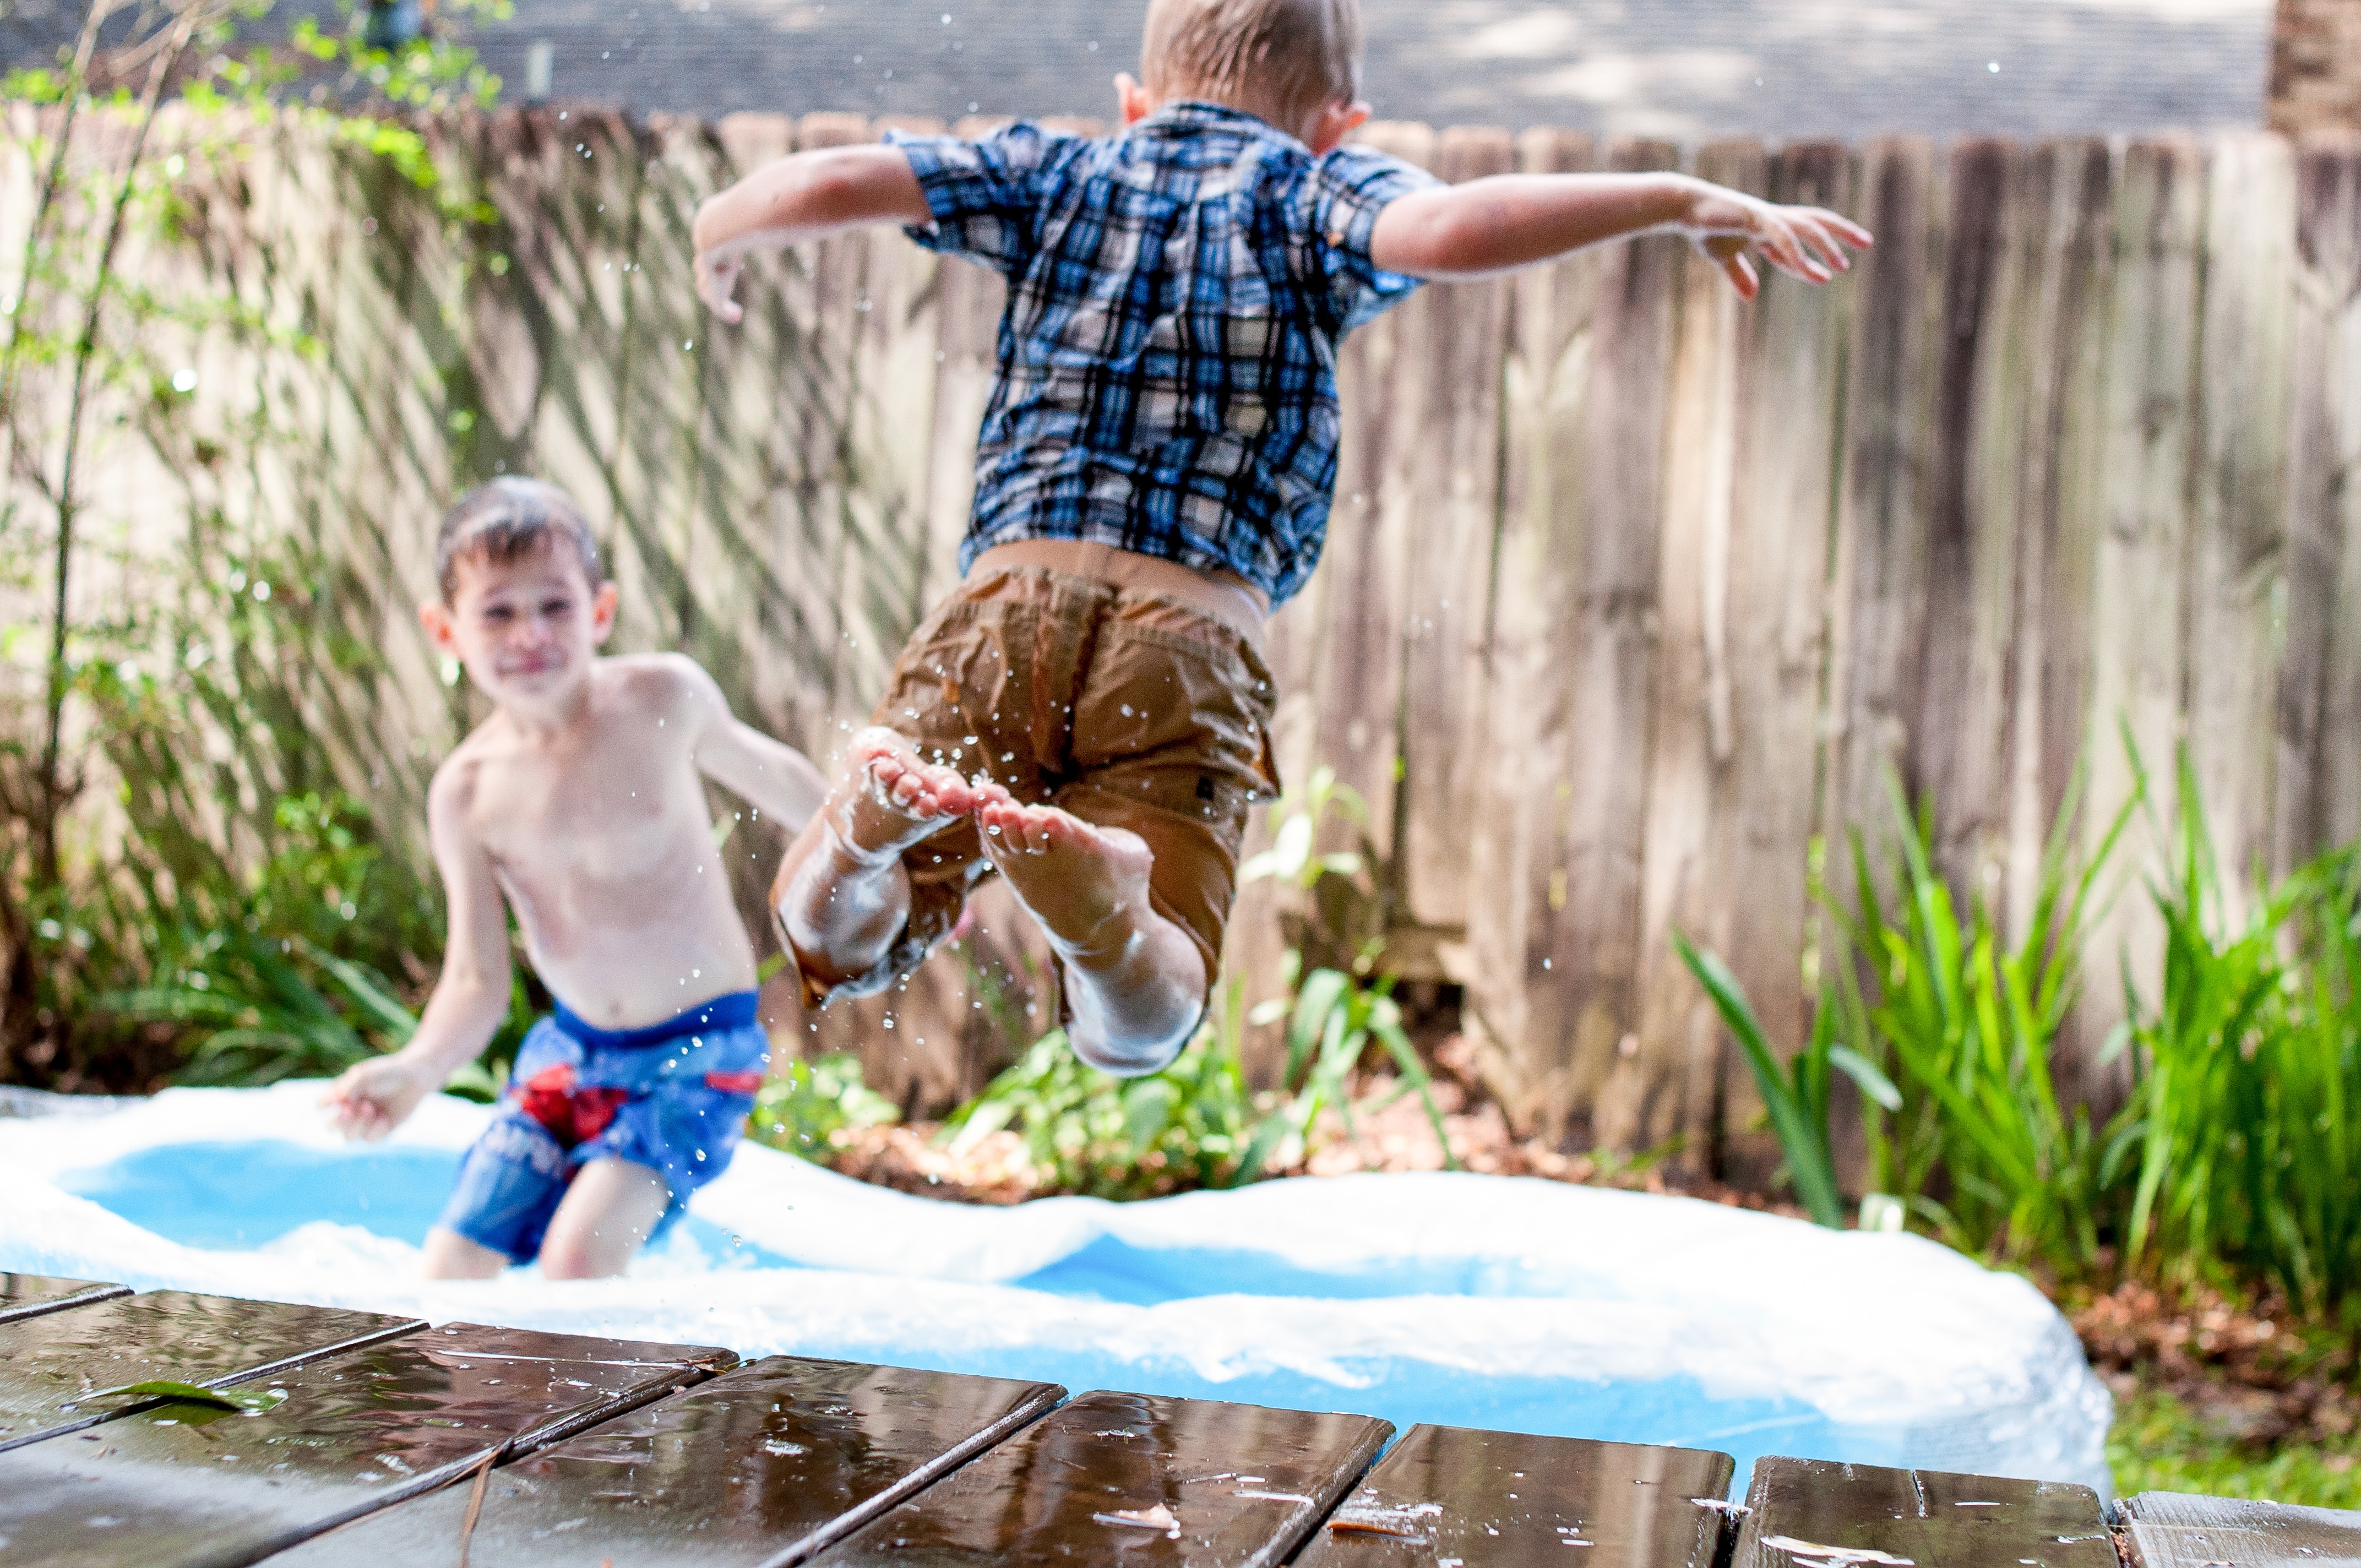 Children jumping into a pool